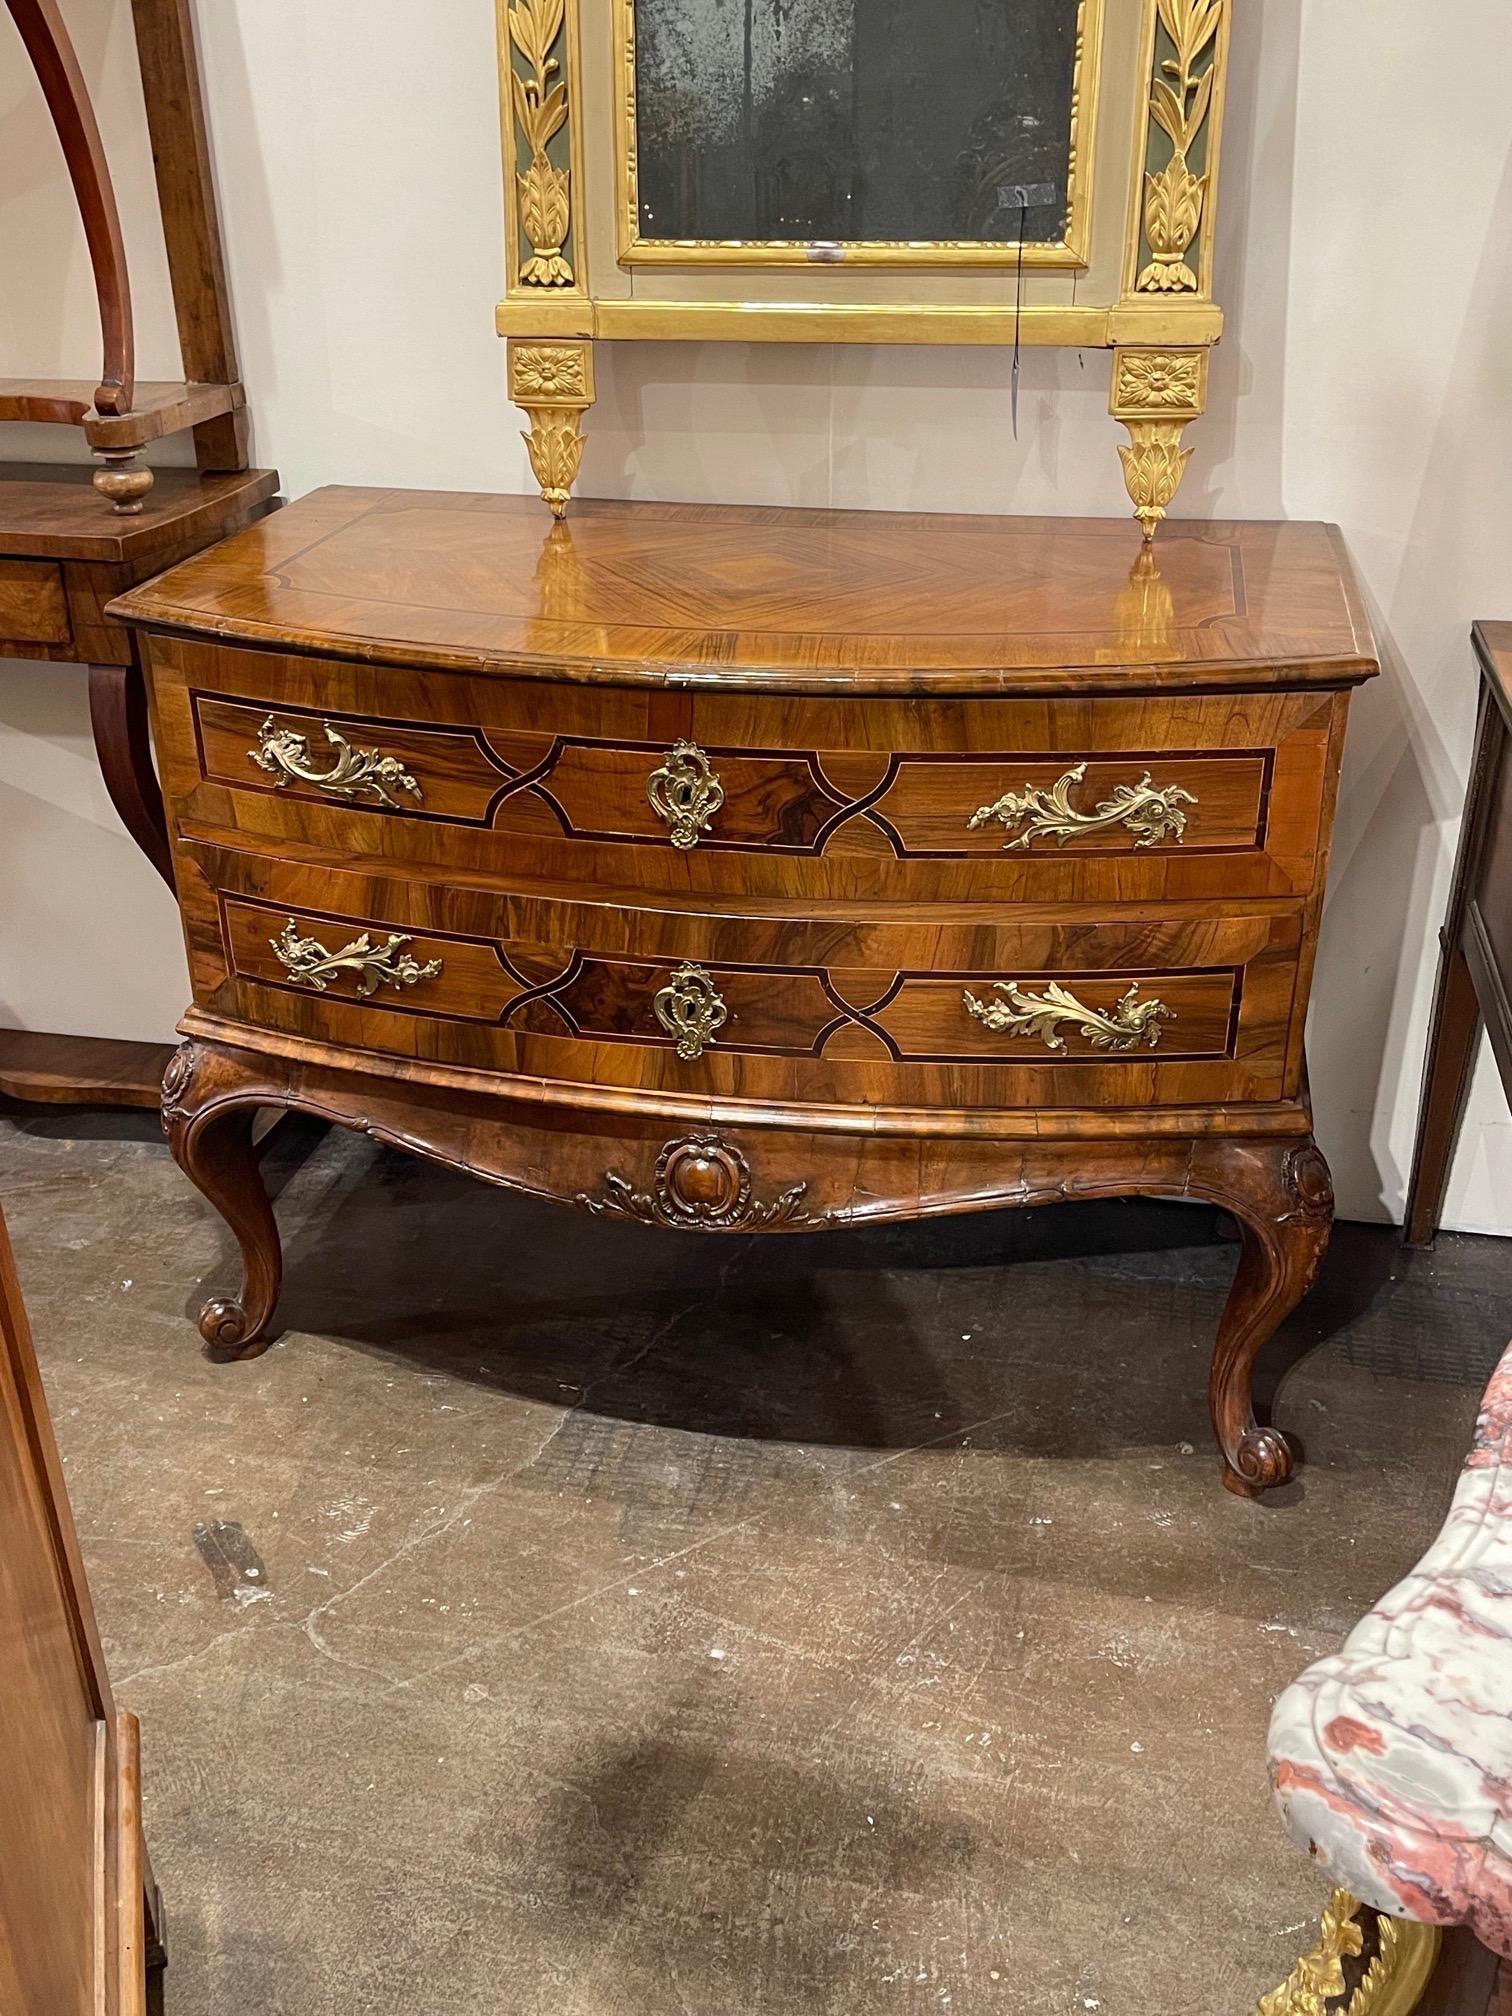 Elegant 18th century Italian walnut and inlaid wood commode. Beautiful finish and lovely decorative hardware as well. An exquisite piece!